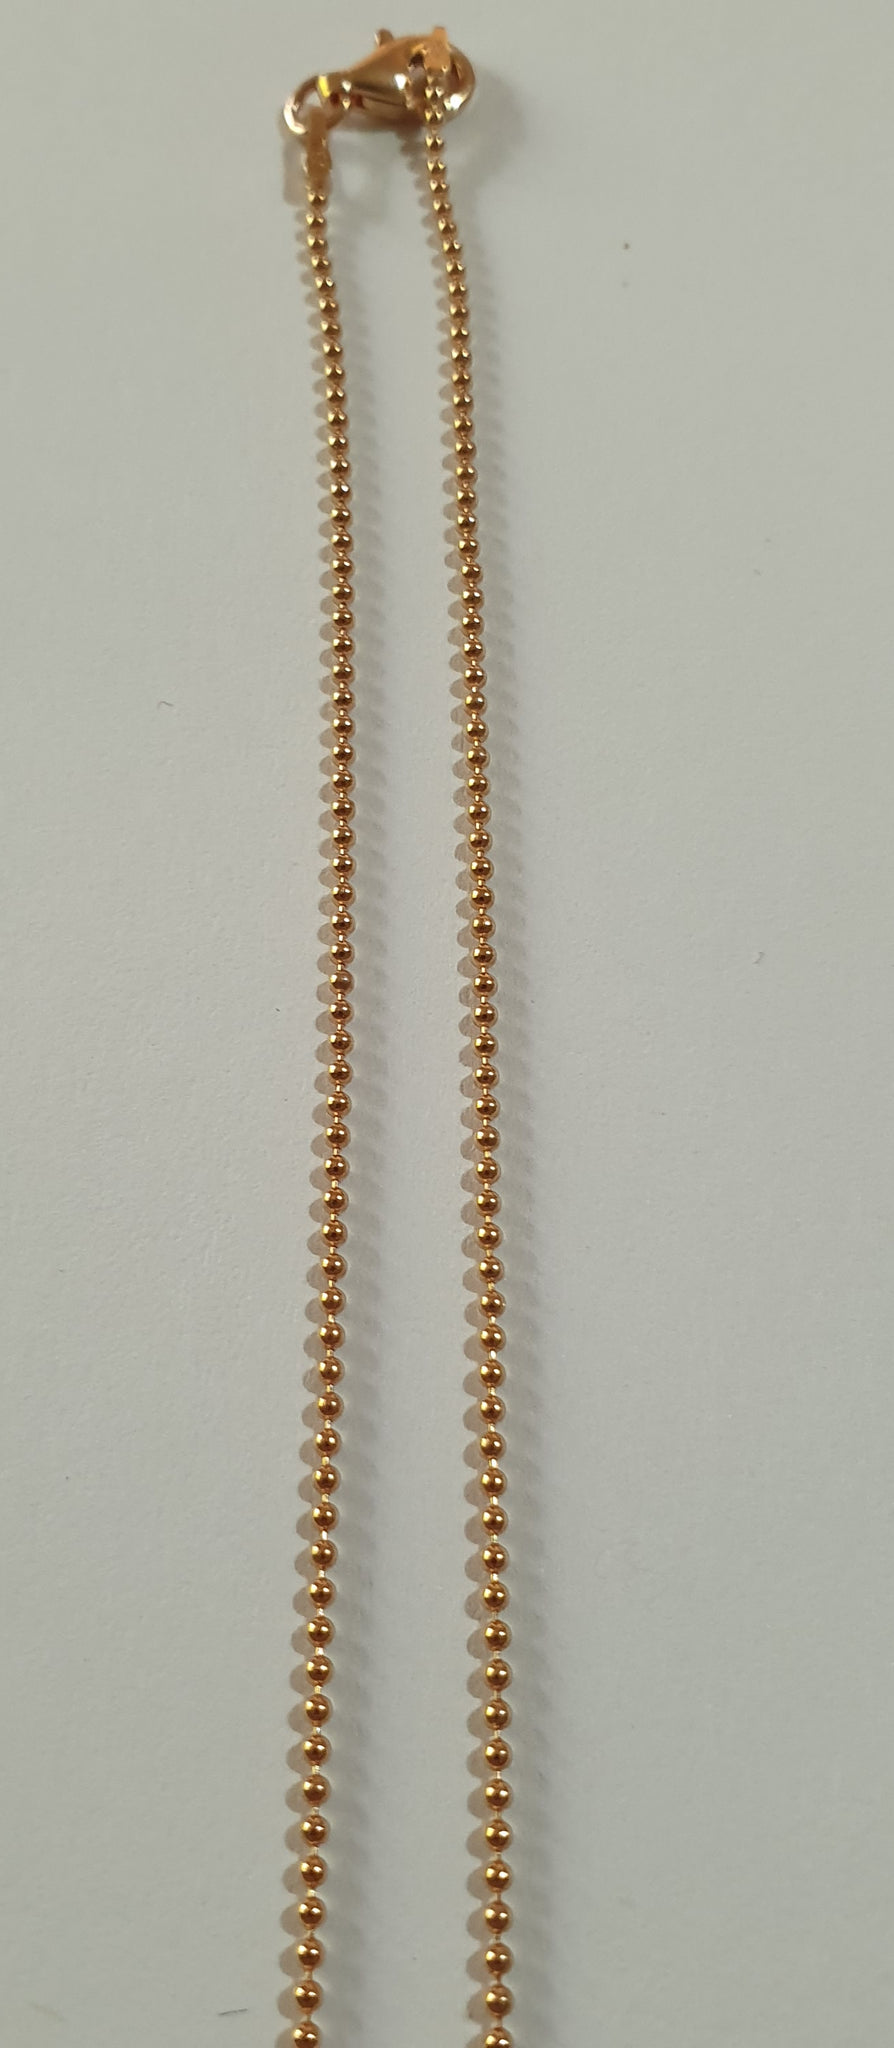 Rosegold plated chain